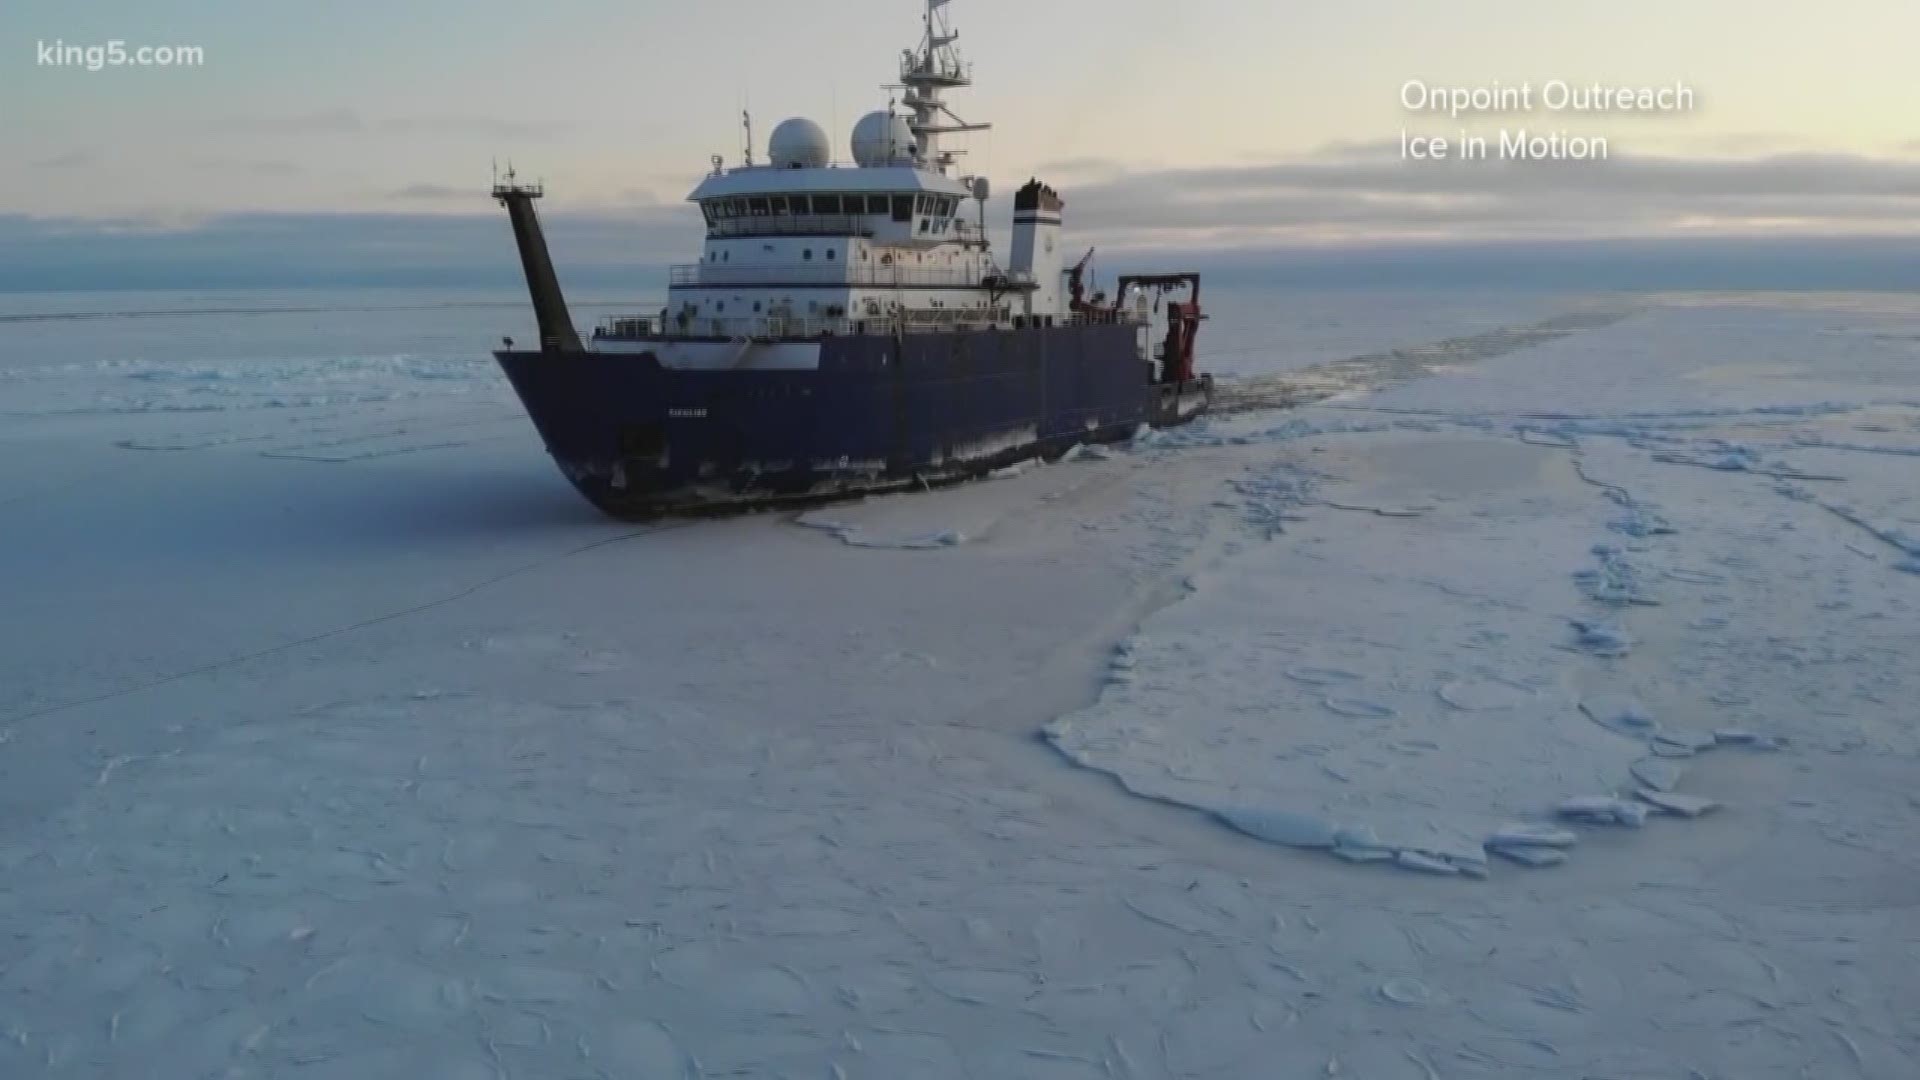 New research from the University of Washington is painting a grim picture in the Arctic.